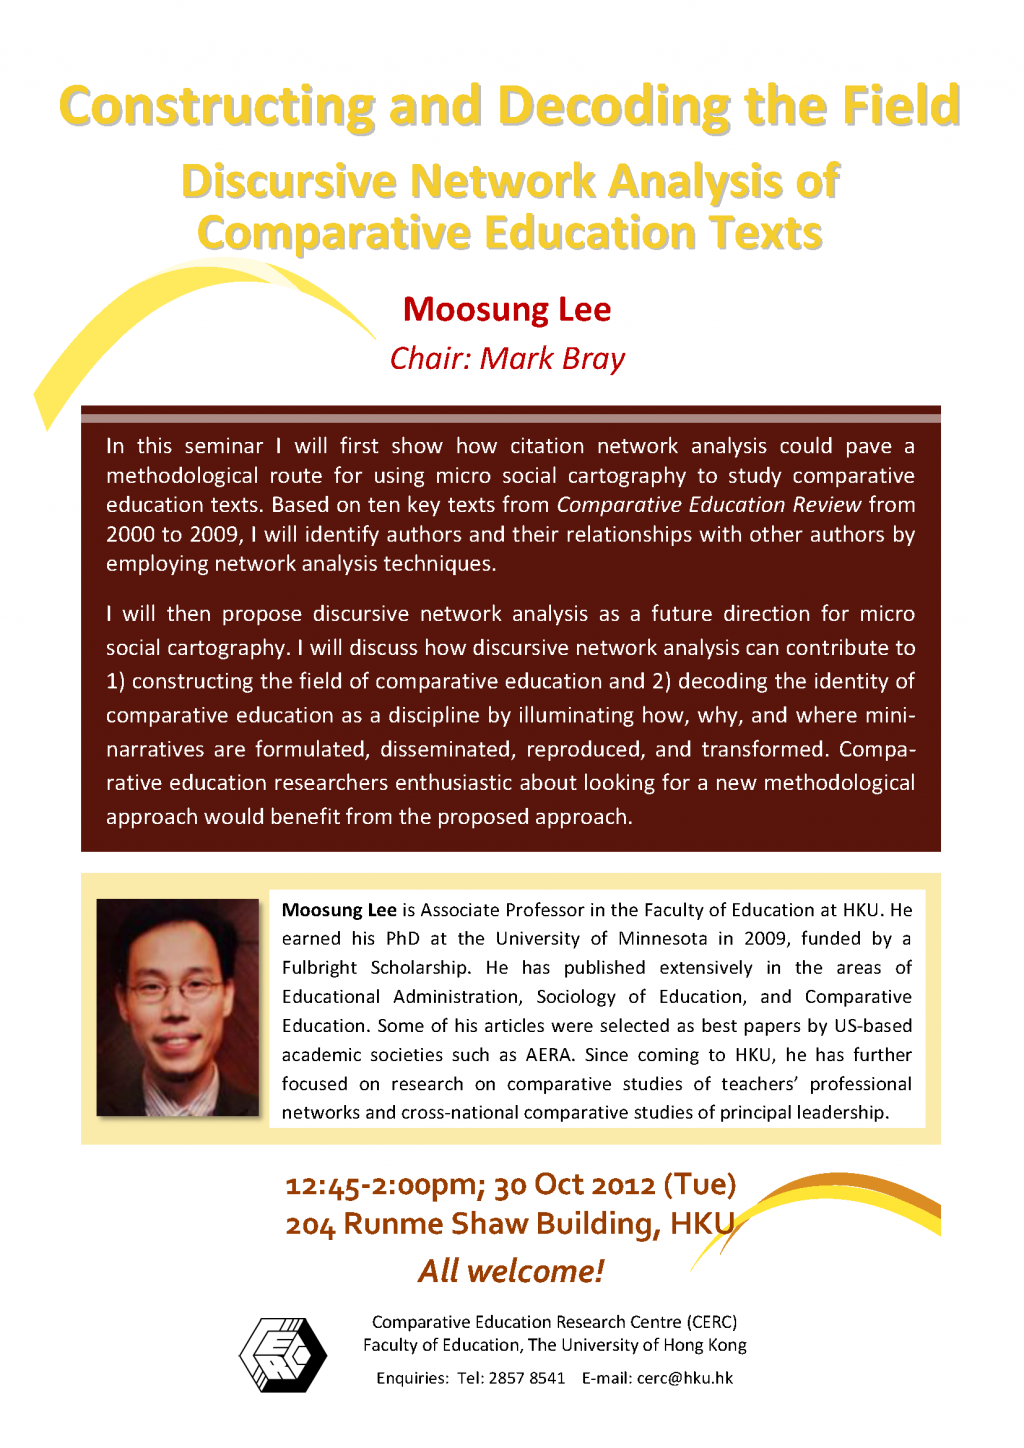 Seminar: Constructing and Decoding the Field: Discursive Network Analysis of Comparative Education Texts